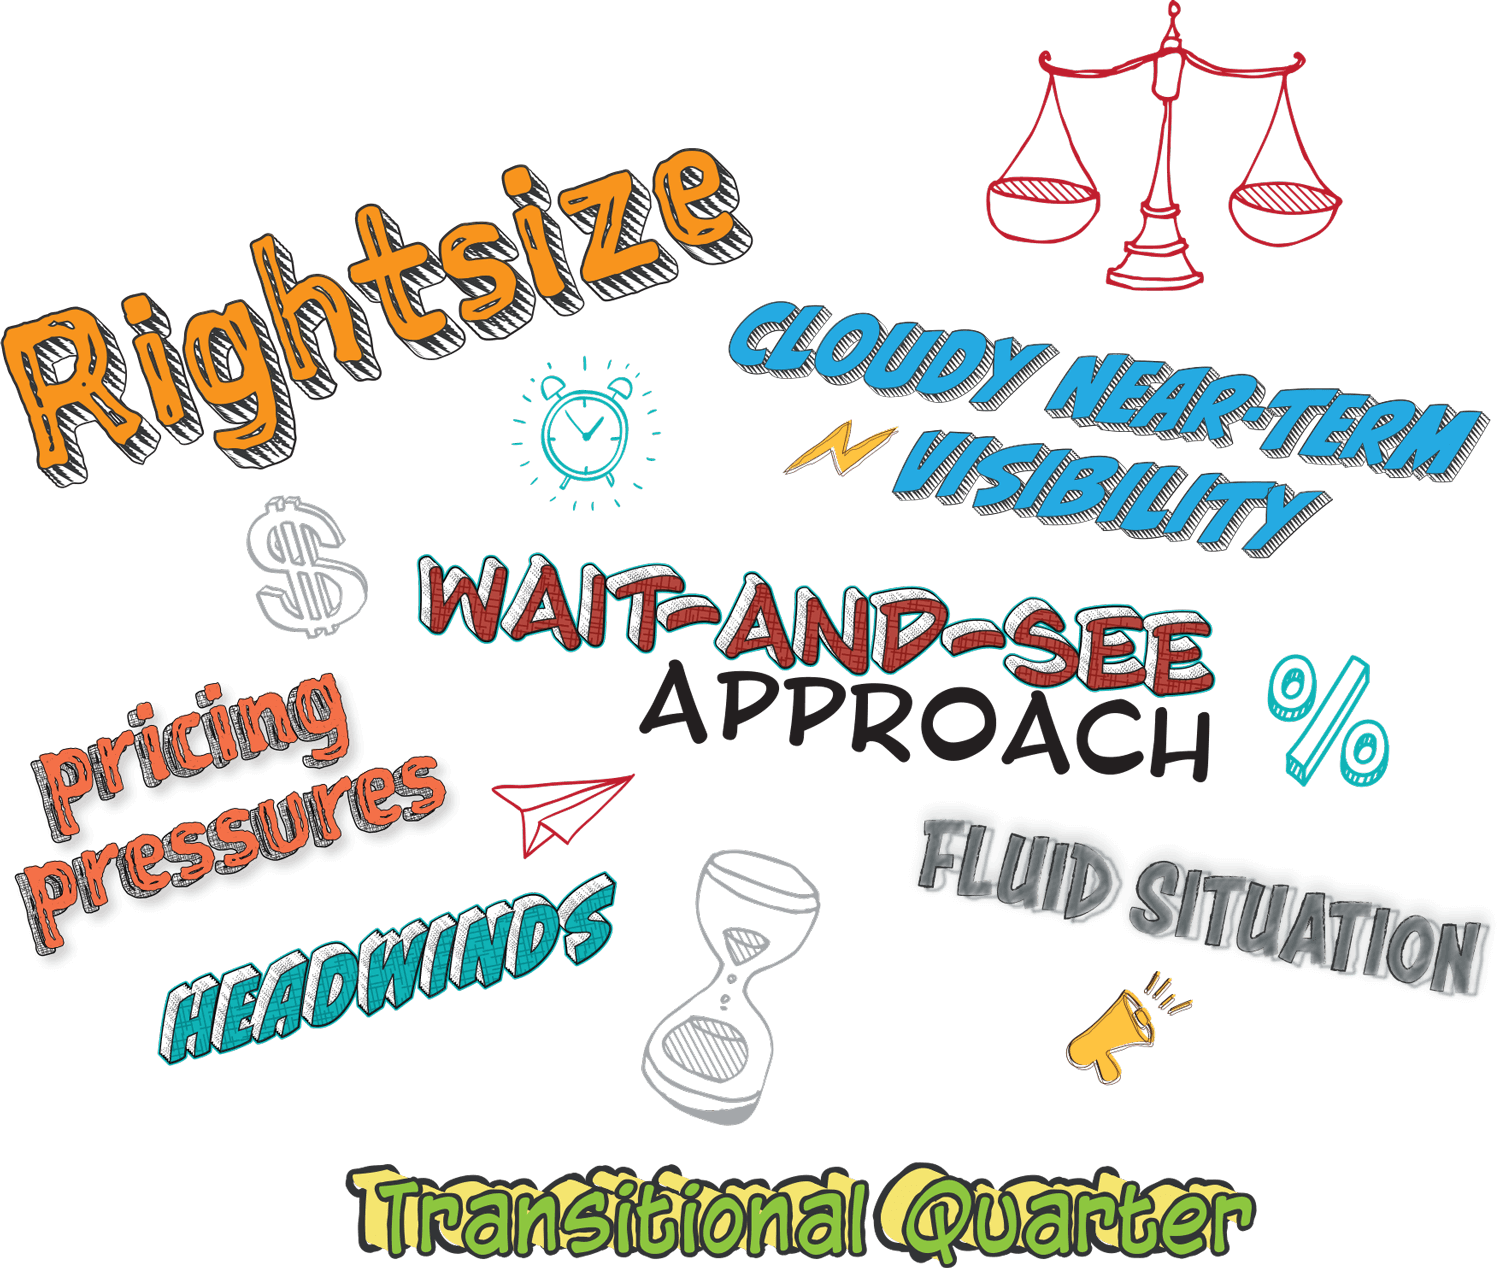 different typographic styles displaying the words rightsize, cloudy near-term visibility, wait-and-see approach, pricing pressures, headwinds, fluid situation, transitional quarter, with clipart of a judge scale, an alarm clock, money sign, paper airplane, percent symbol, hourglass, and megaphone